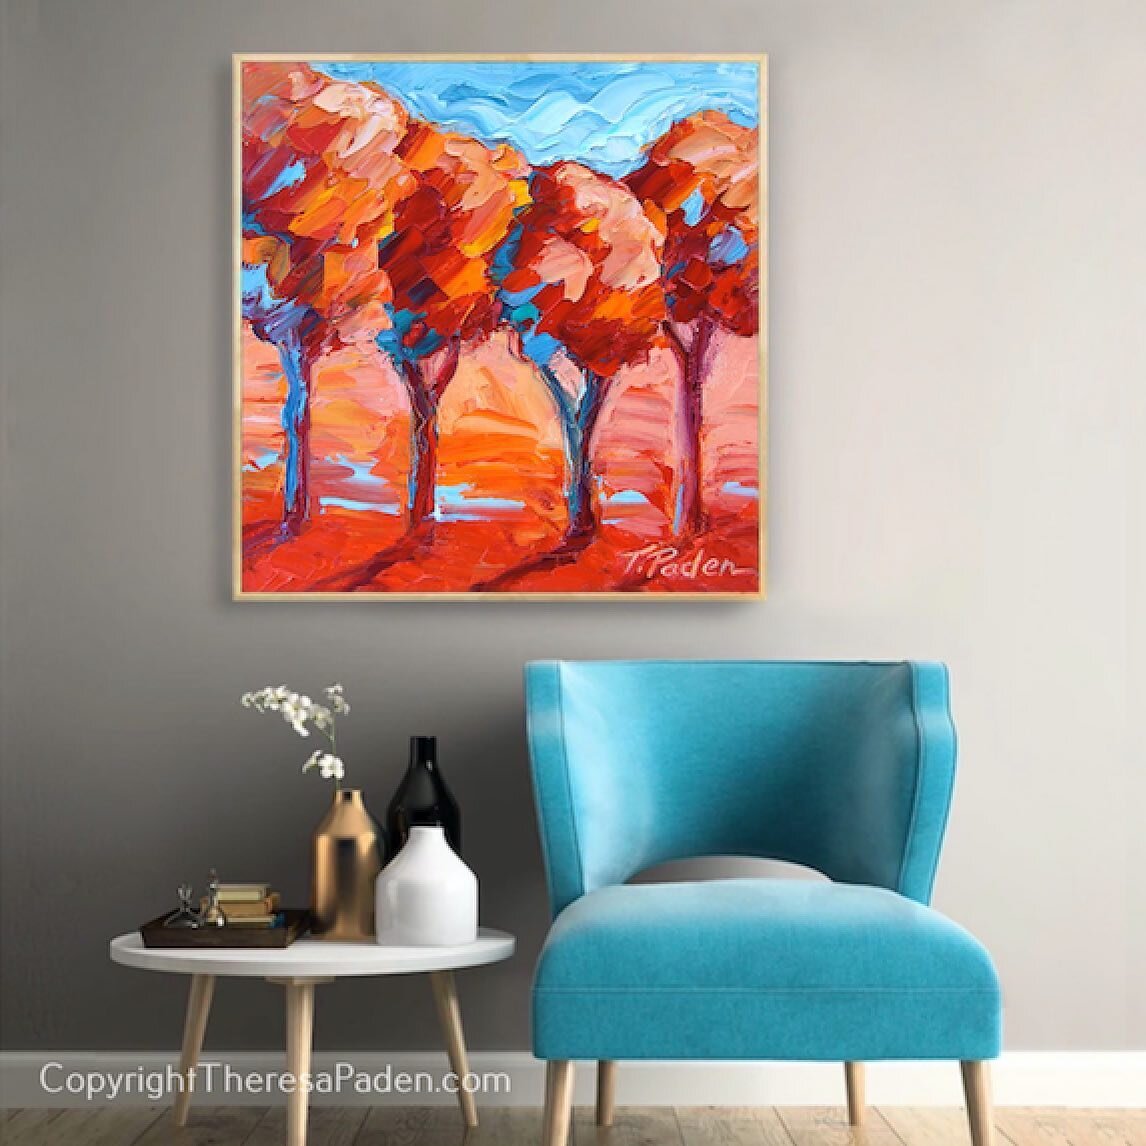 Prints of my painting &ldquo;Four Trees in Autumn&rdquo; are available. www.TheresaPaden.com